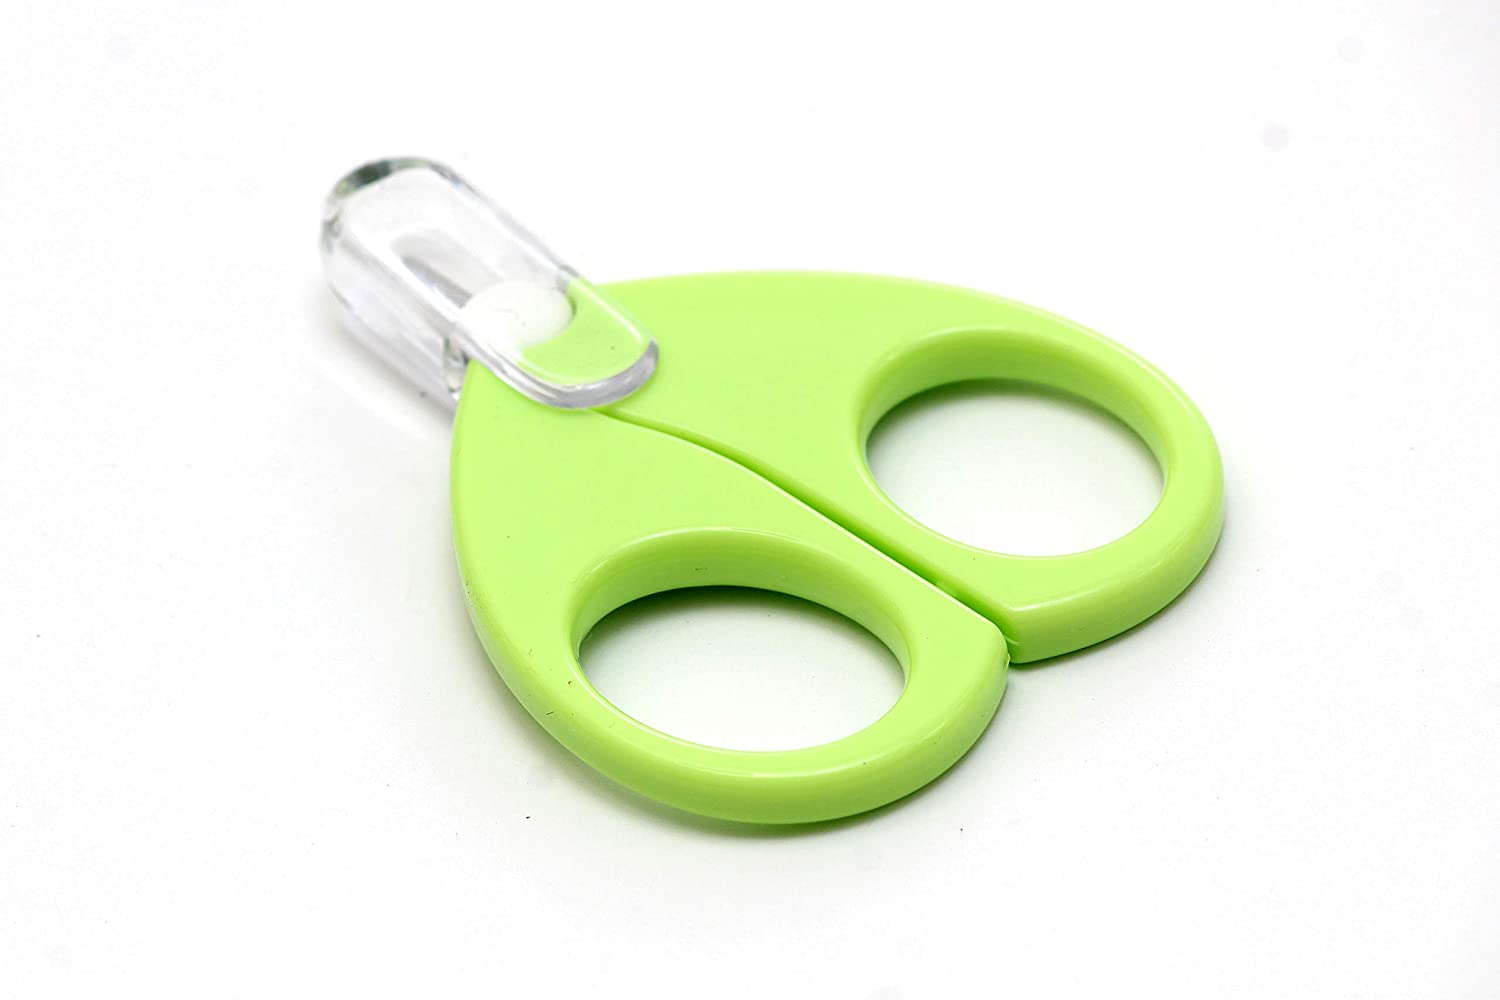 Rikang Baby Safety Scissors with Circular Cutter Head